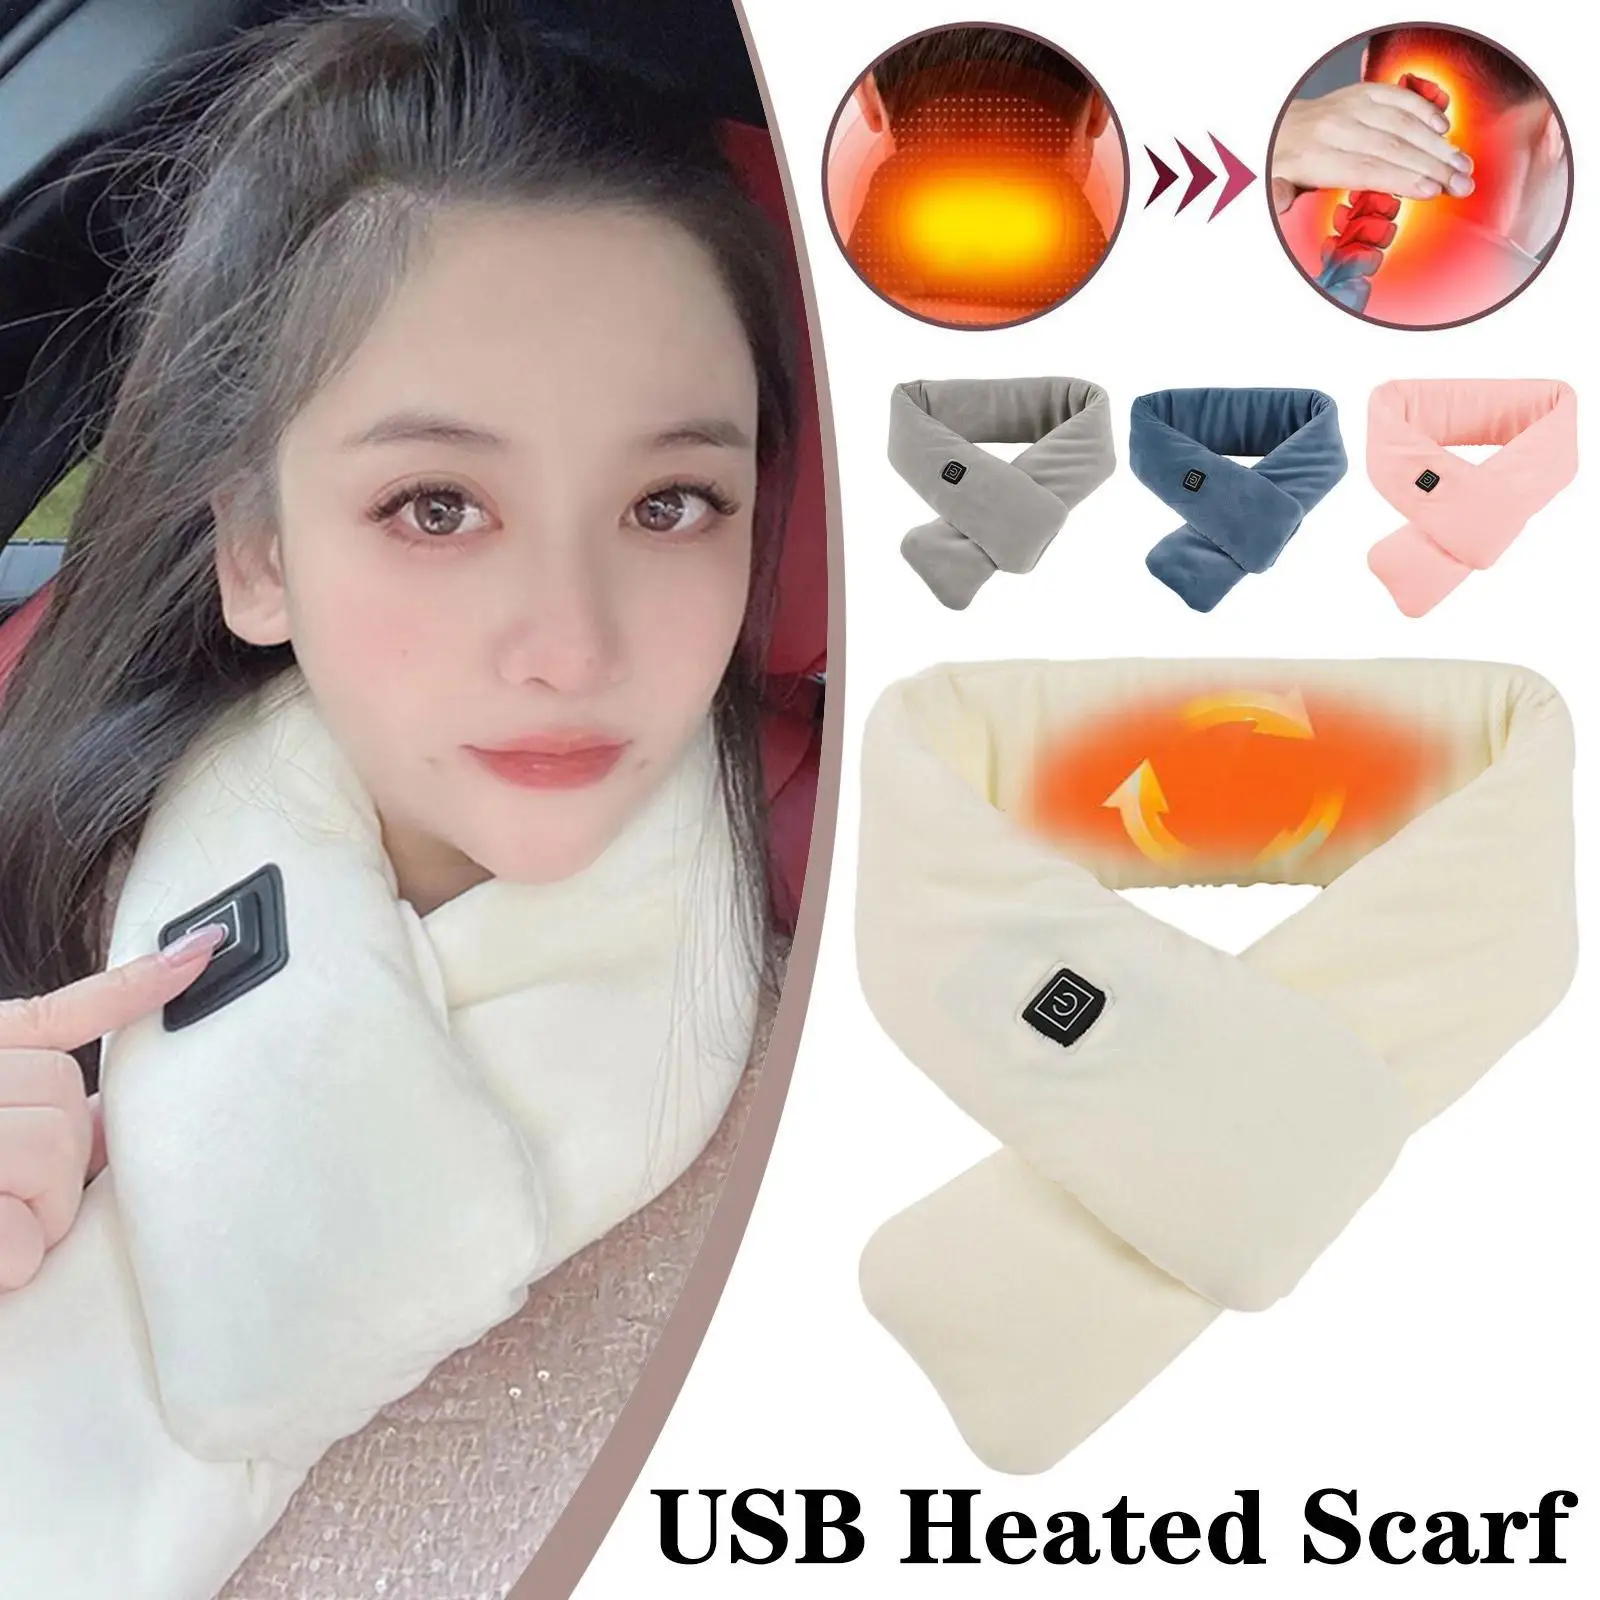 

Winter USB Heated Scarf 3 Level Adjustable Temperature Men Women Heating Scarf Neckerchief Neck Warmer Shawl For Cycling Camping